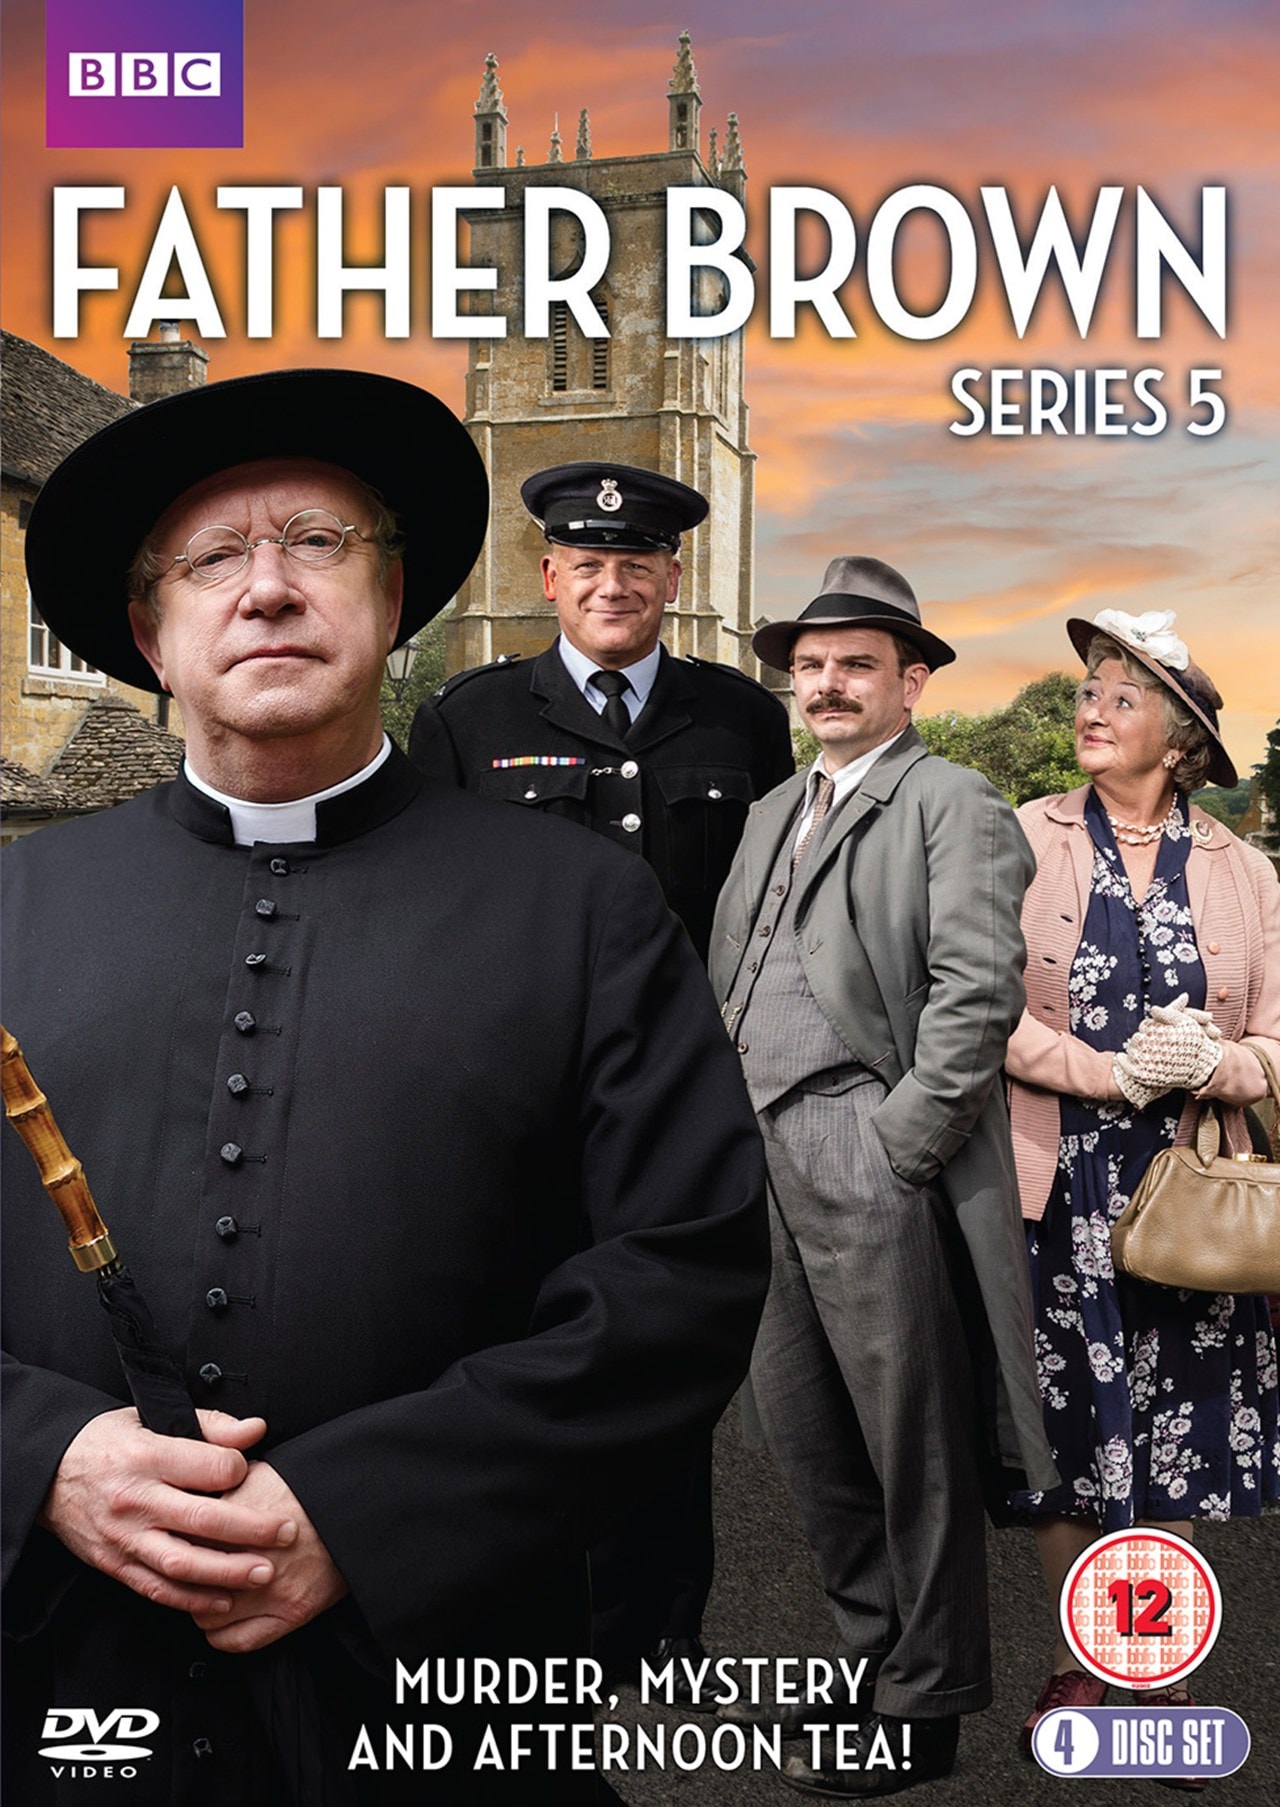 Father Brown Series 5 DVD Free shipping over £20 HMV Store